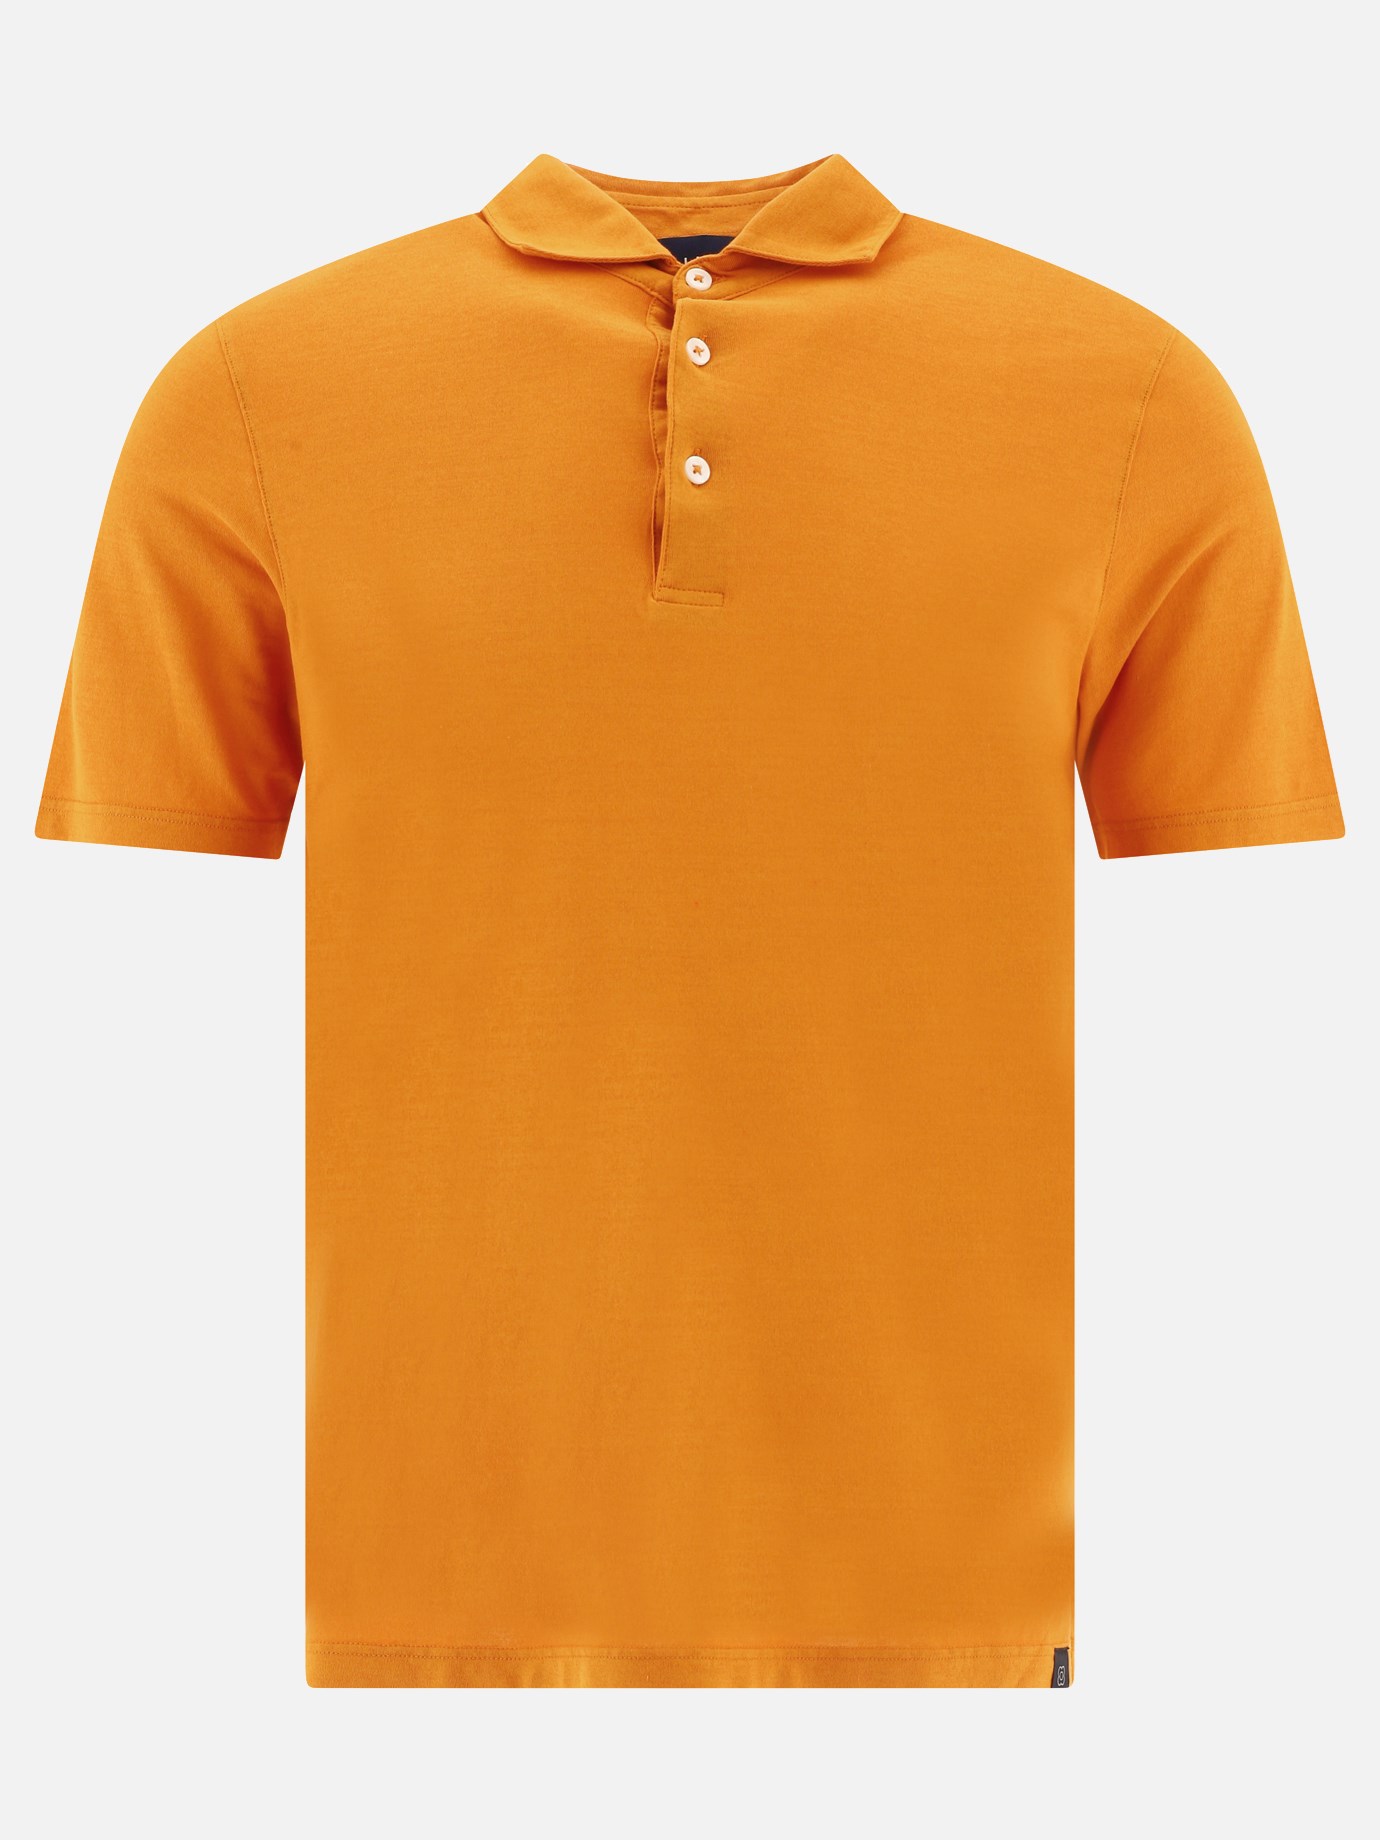 Polo shirt with buttons